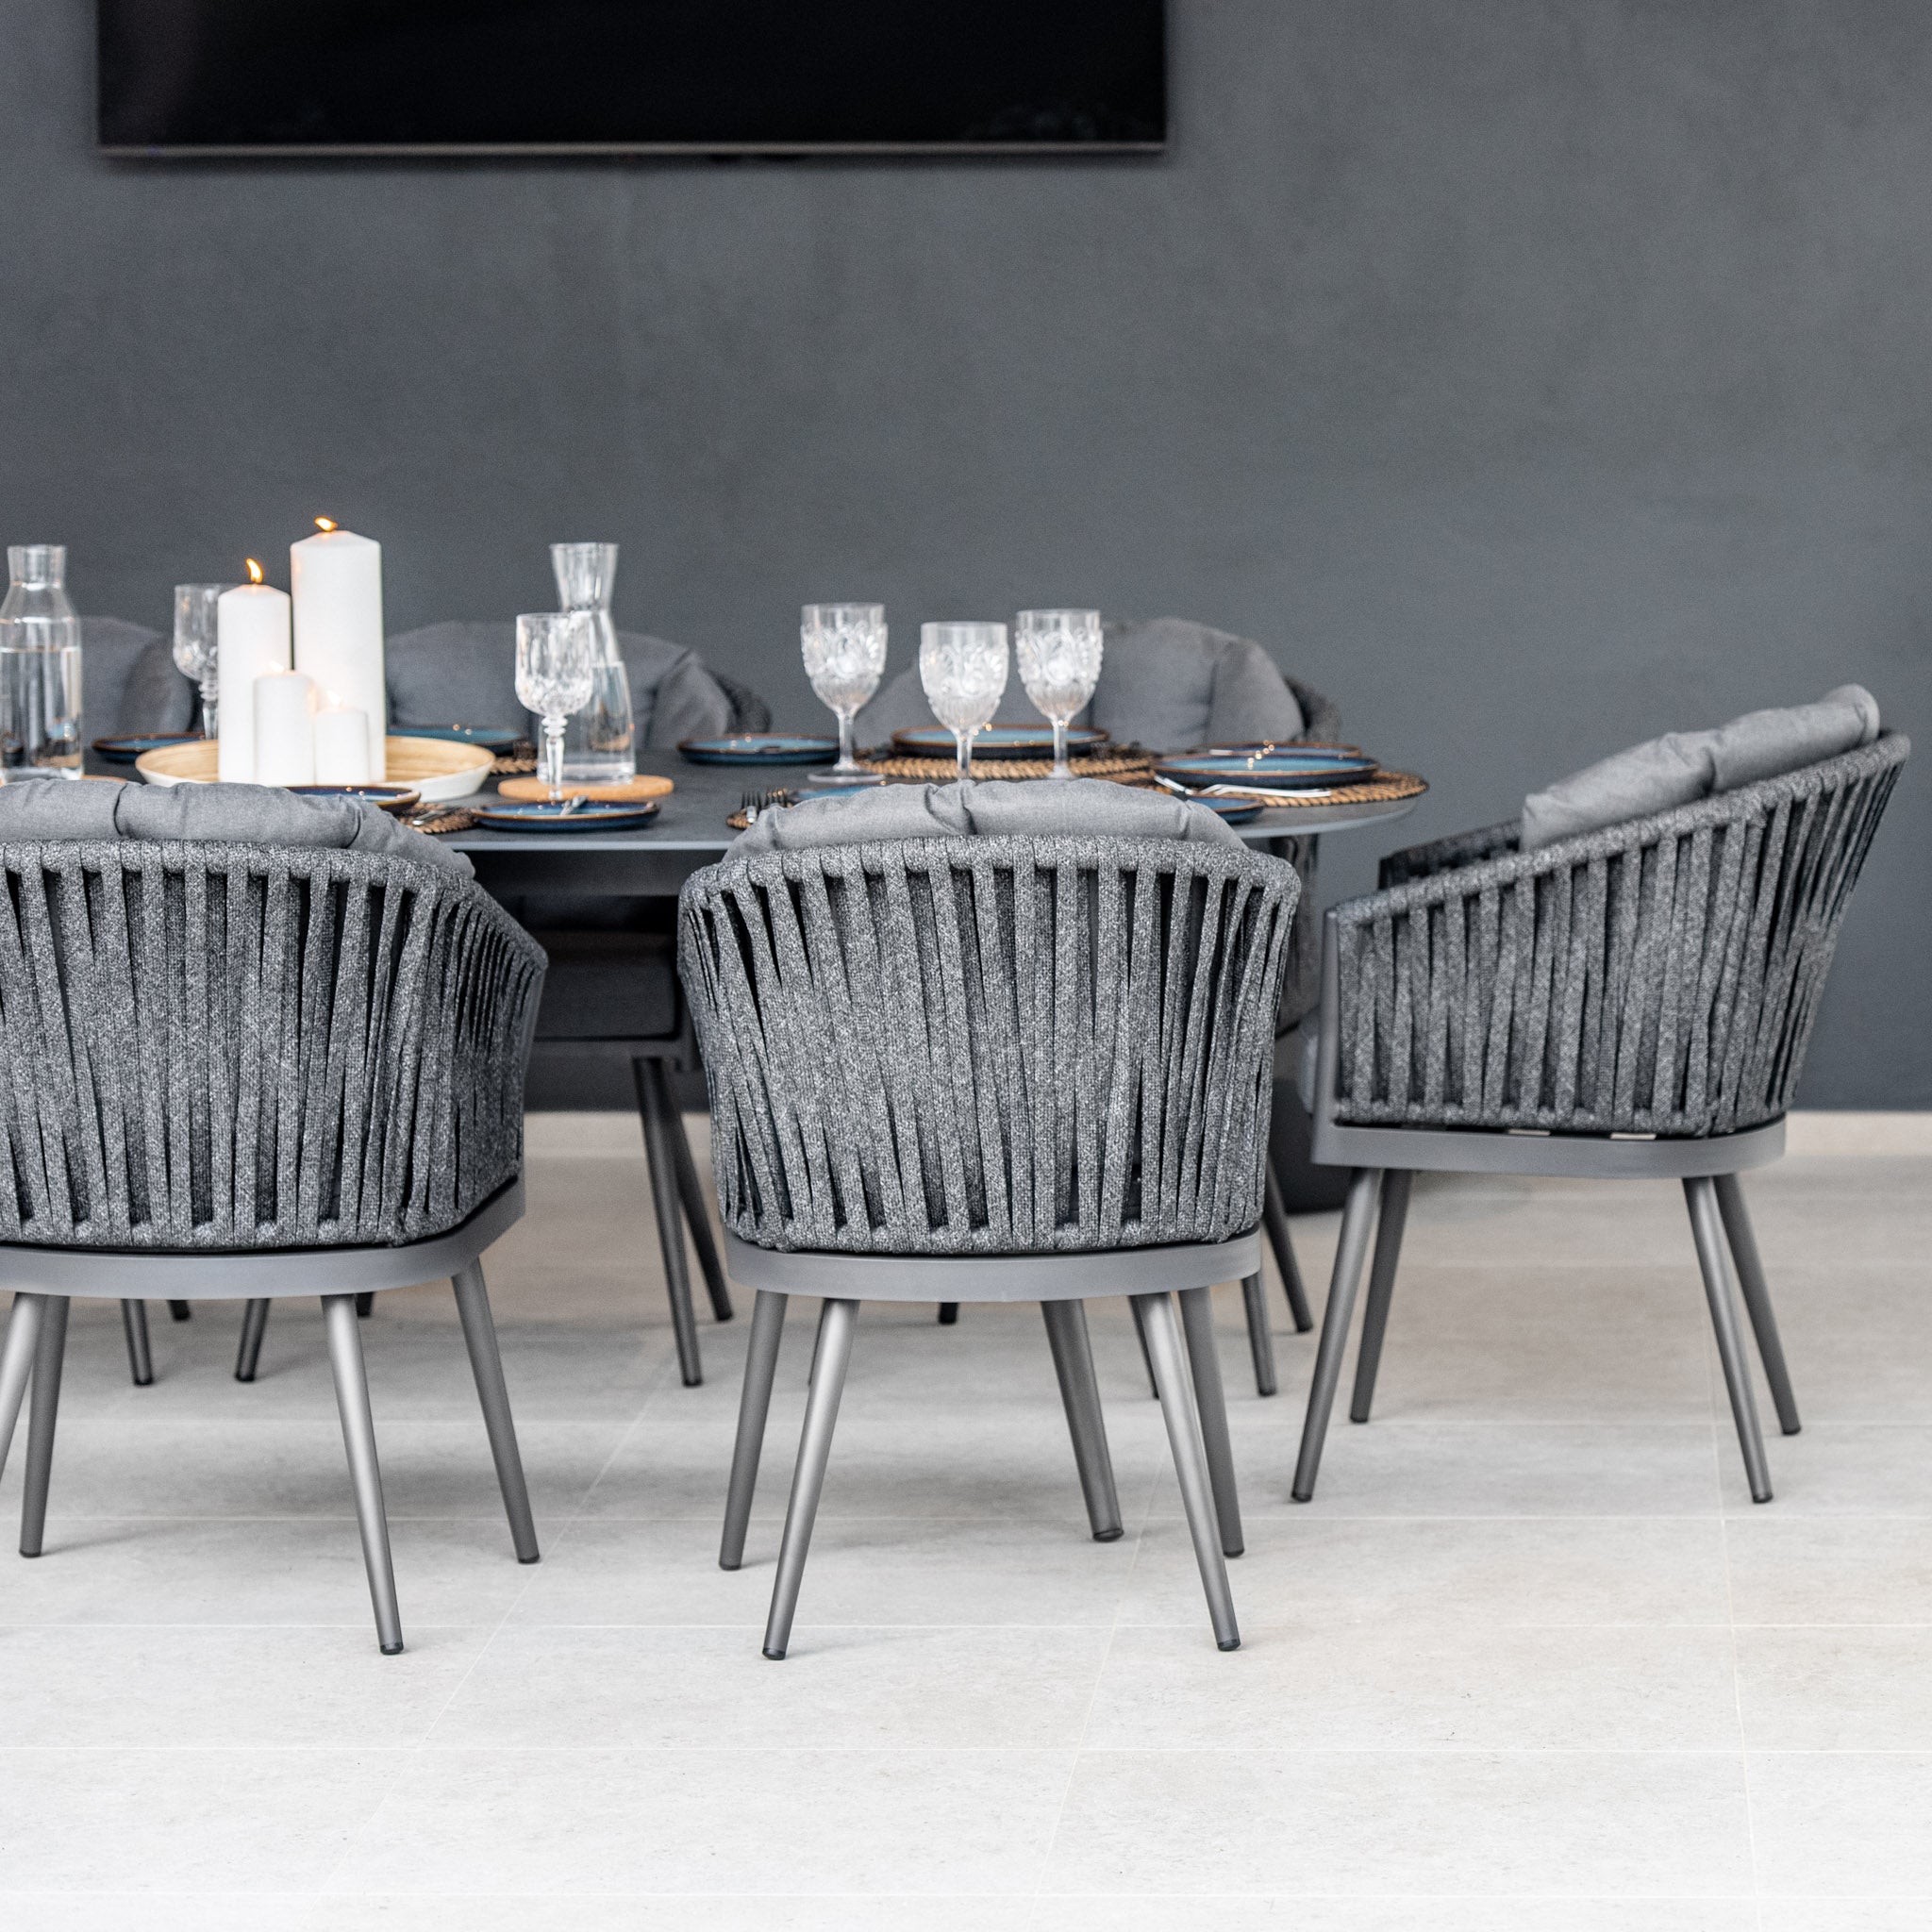 Monterrey 8 Seat Rope Dining Set with Oval Ceramic Table in Grey